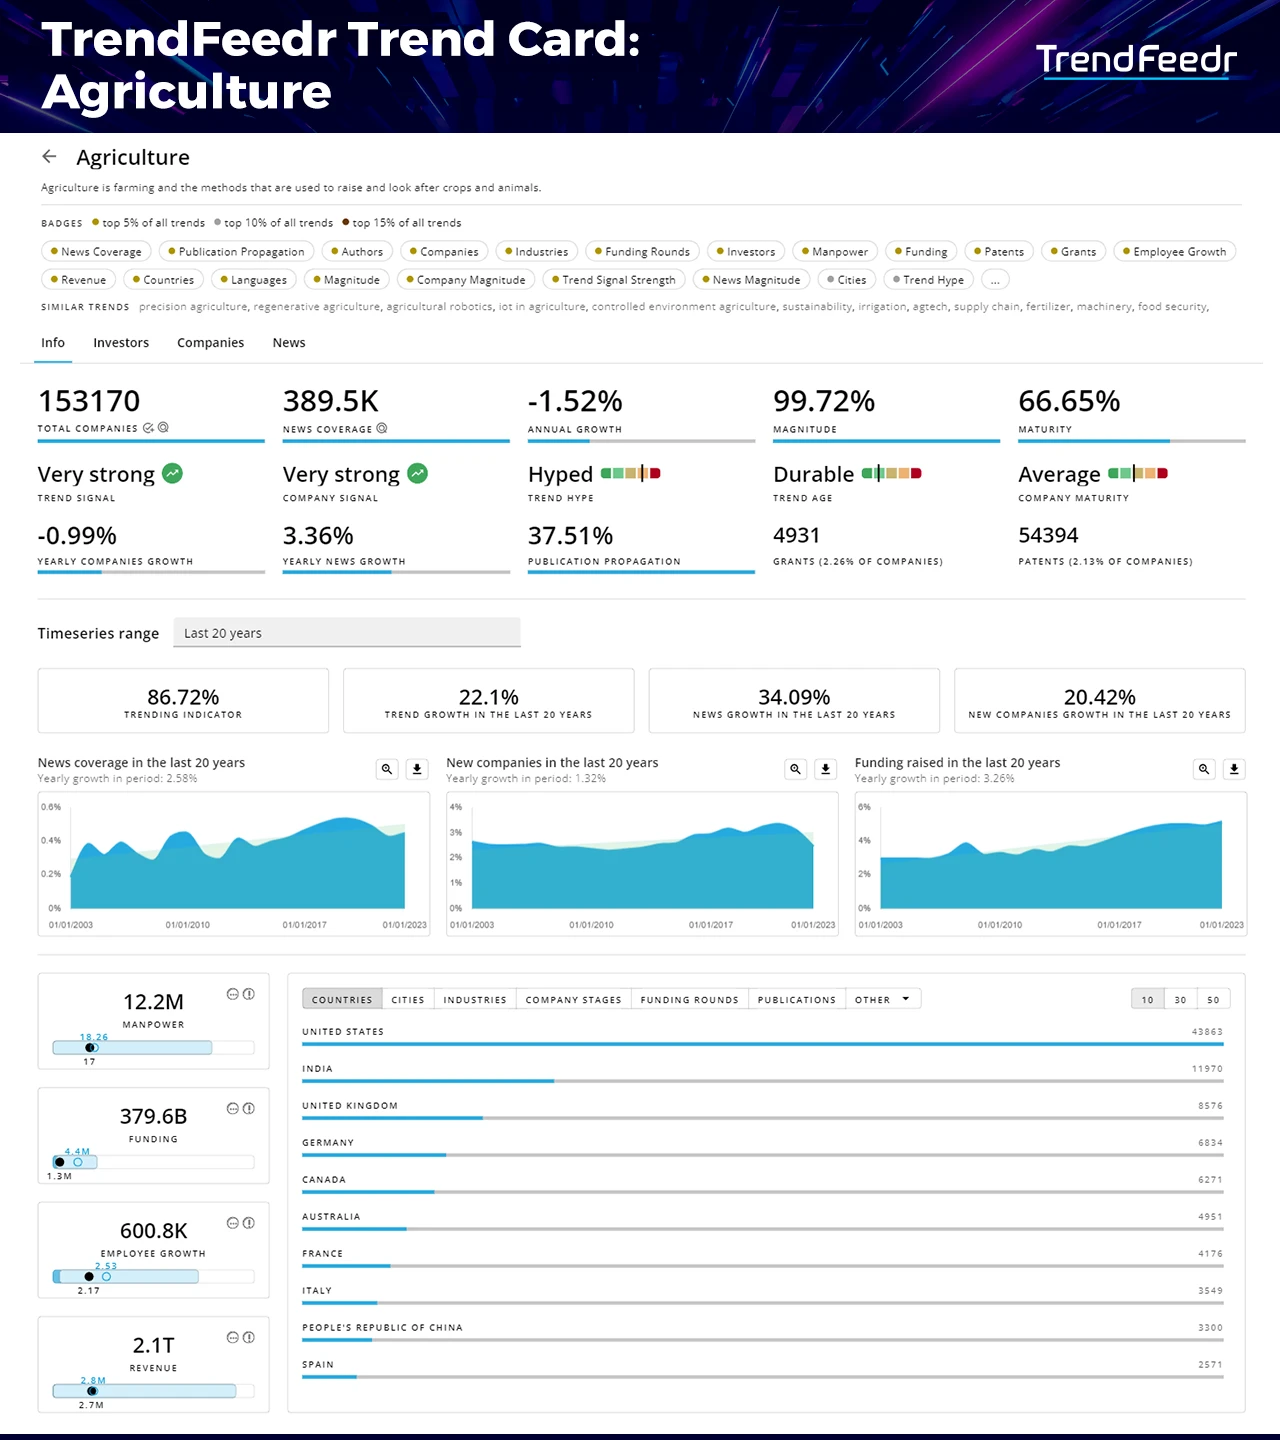 Agriculture-Trends-Report-TrendCard-TrendFeedr-noresize